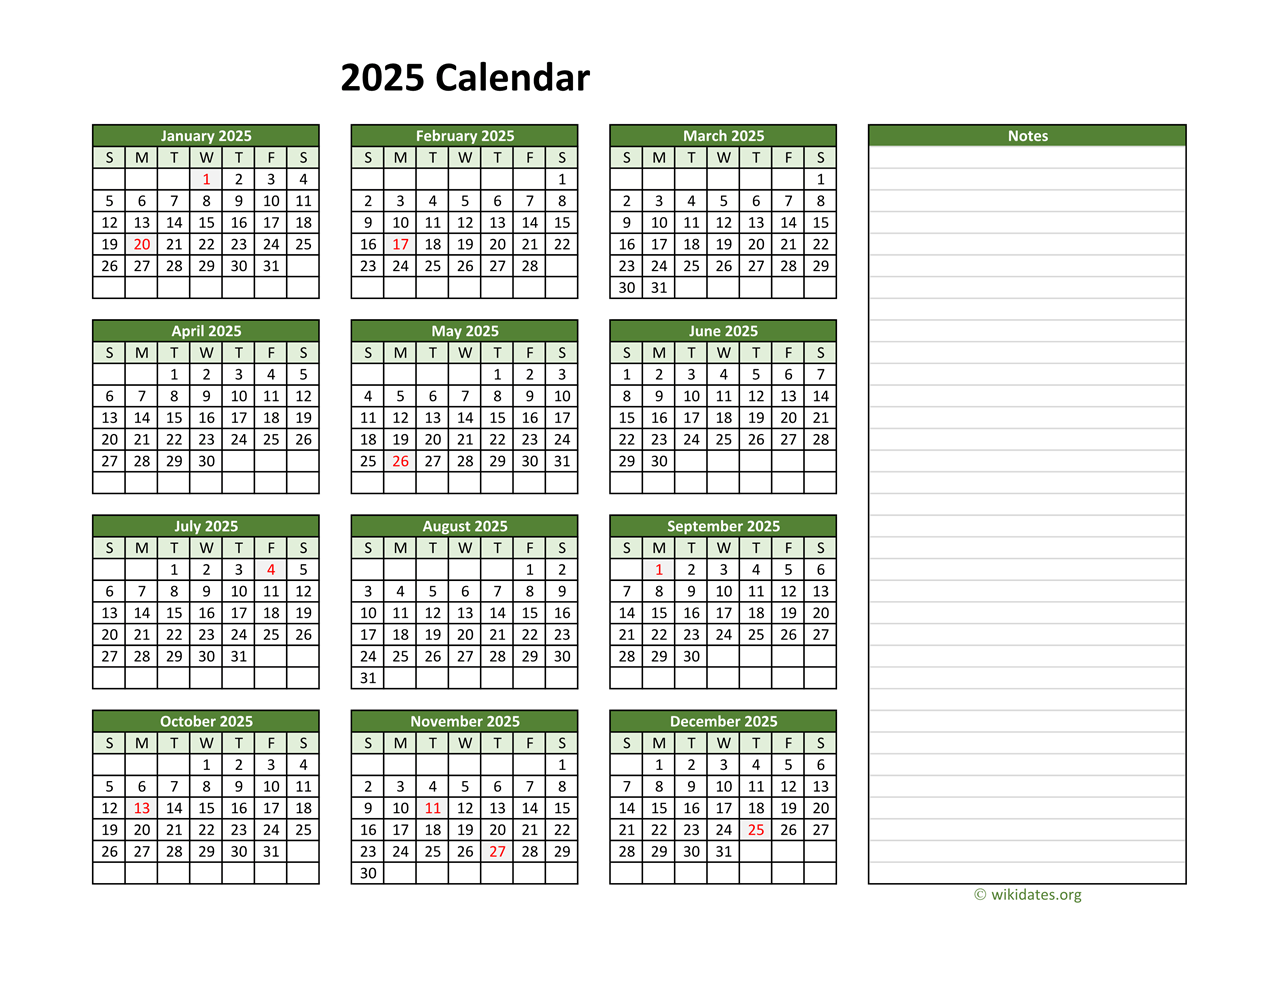 Yearly Printable 2025 Calendar With Notes WikiDates